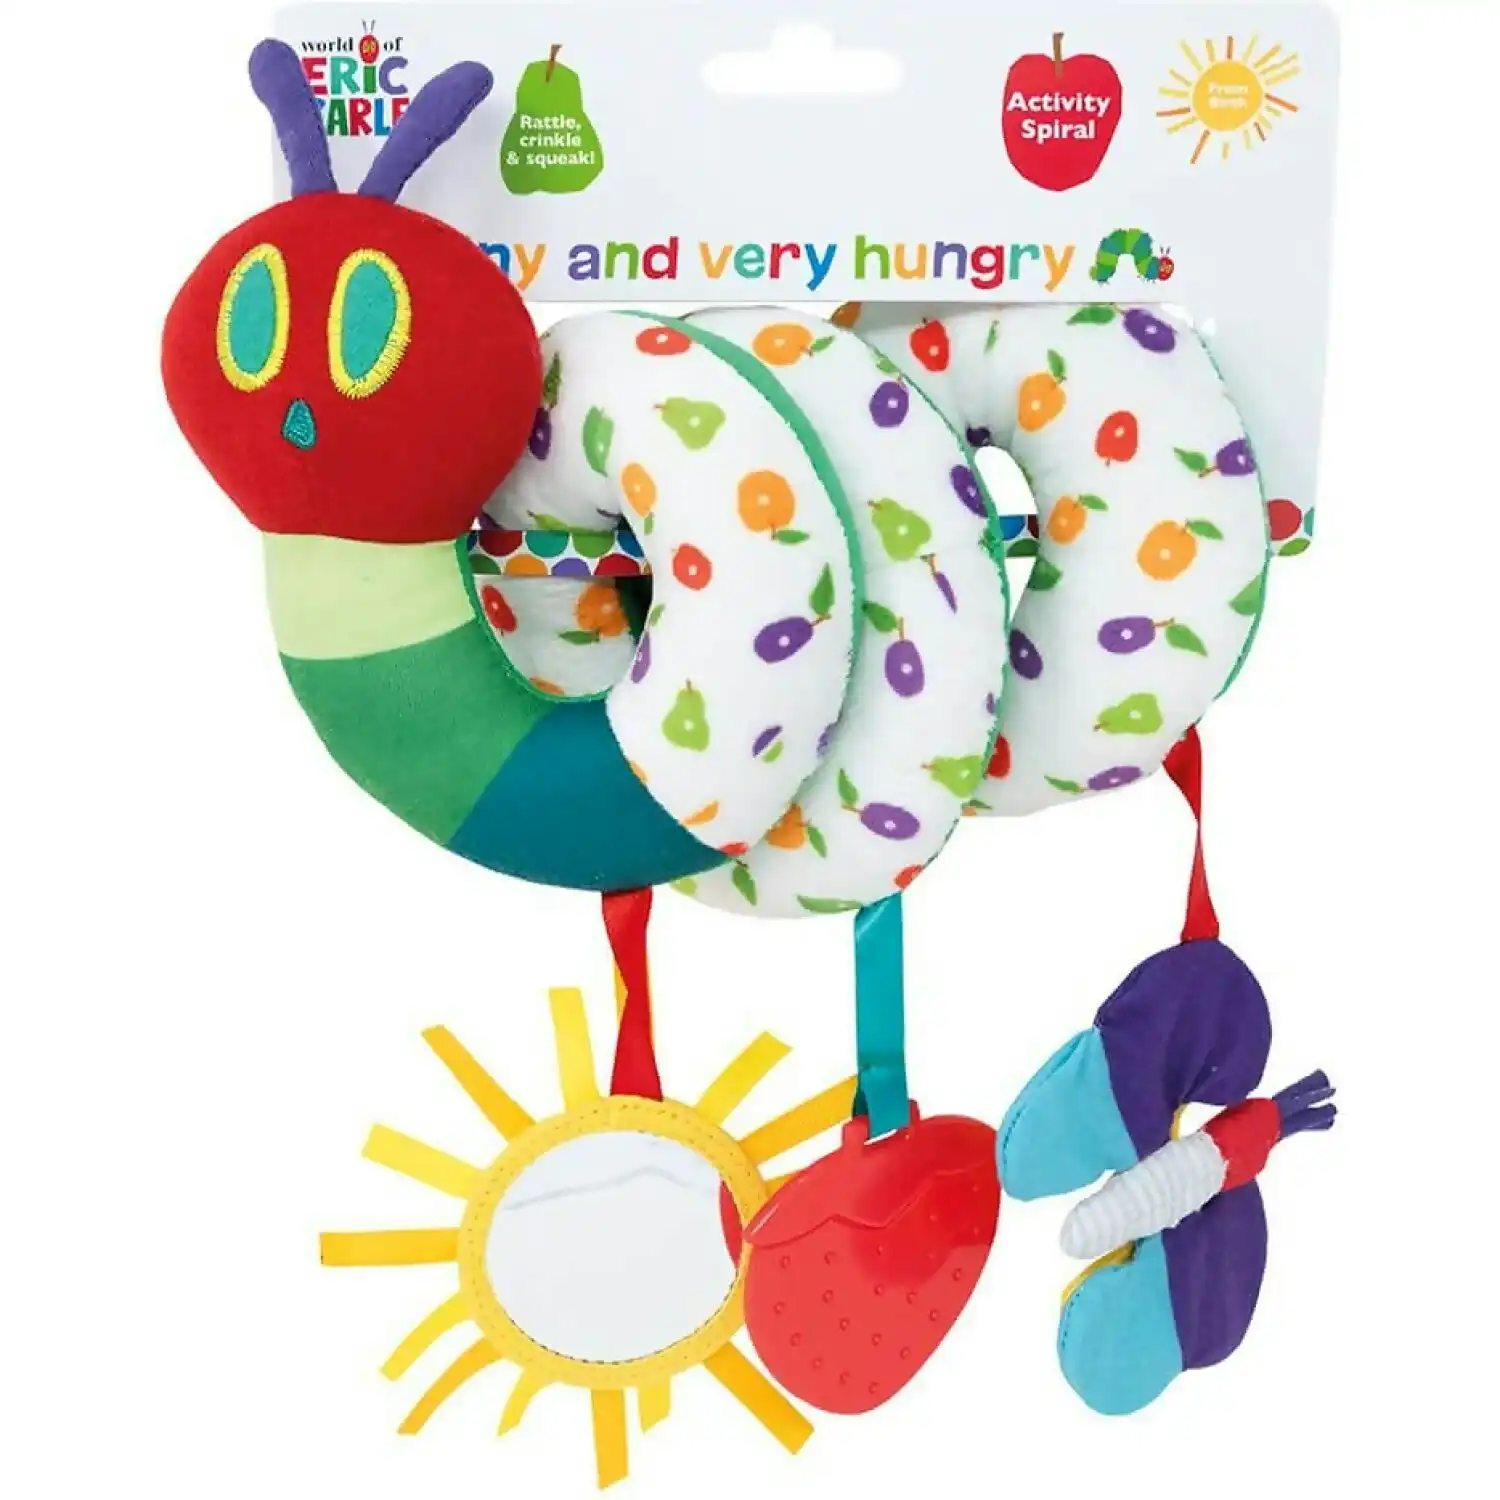 The Very Hungry Caterpillar - Tiny And Very Hungry Caterpillar Activity Spiral - The World Of Eric Carle